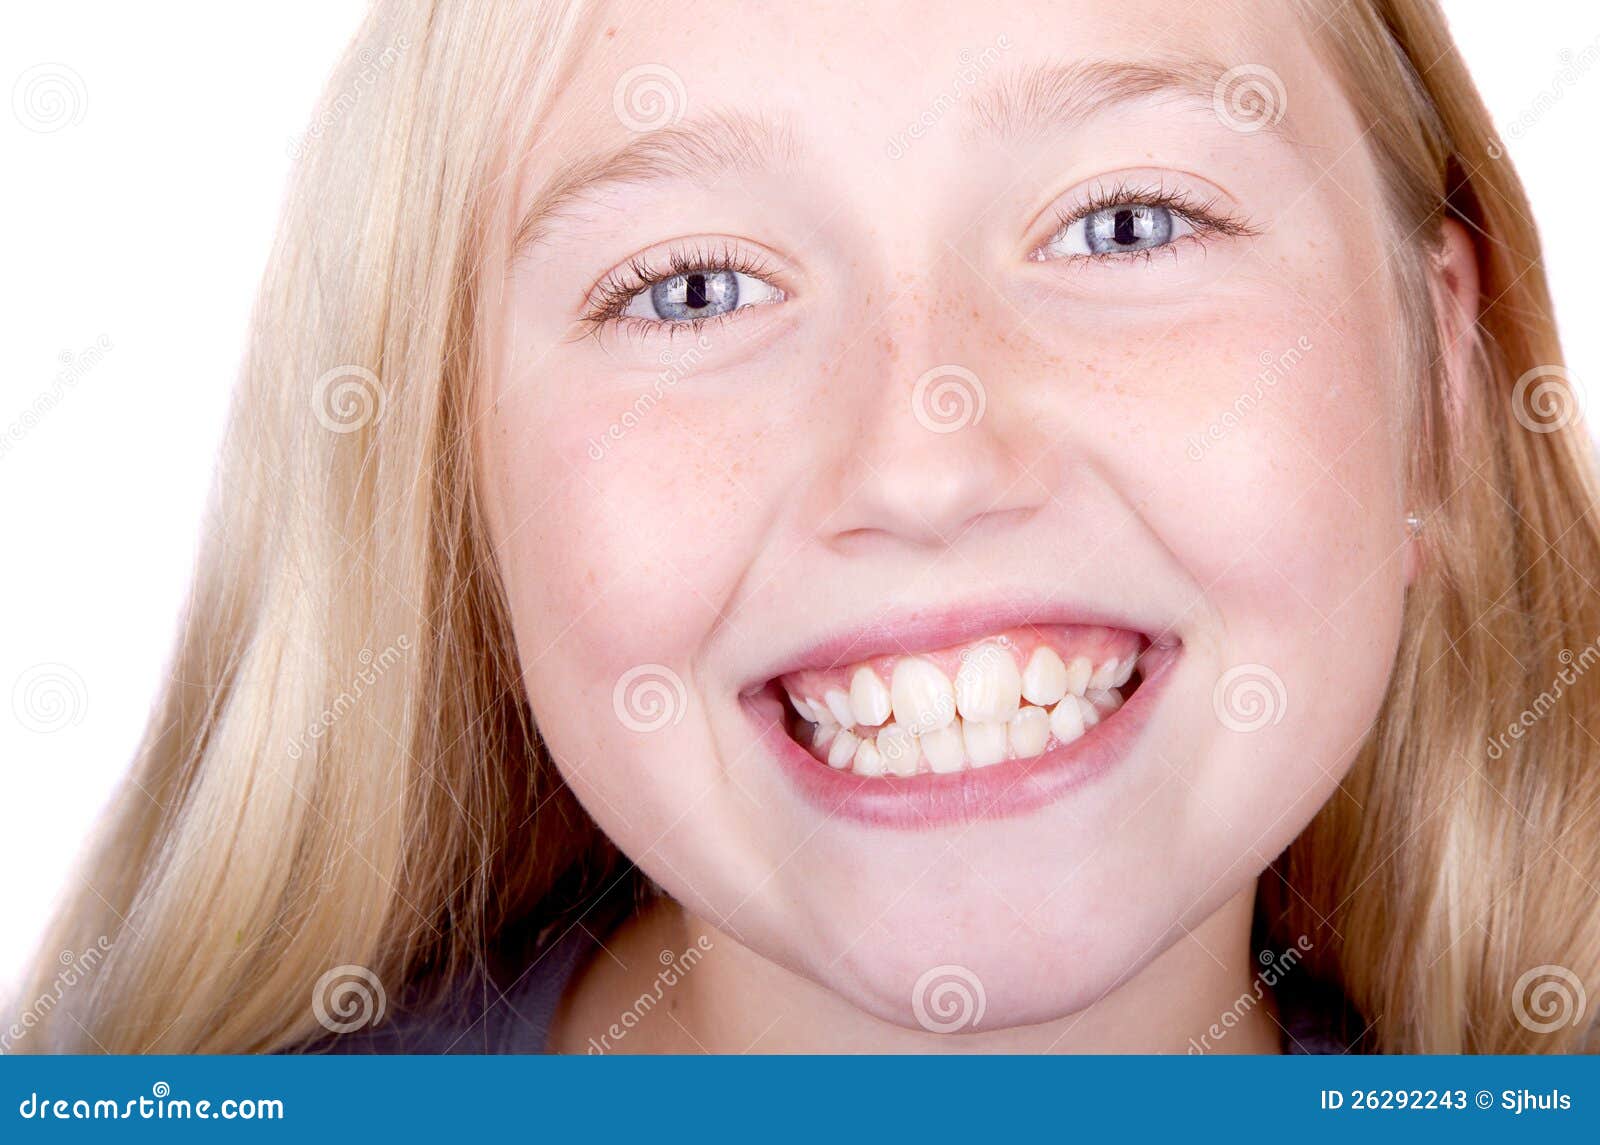 Teen Smiling Close Up Stock Image Image Of Childhood